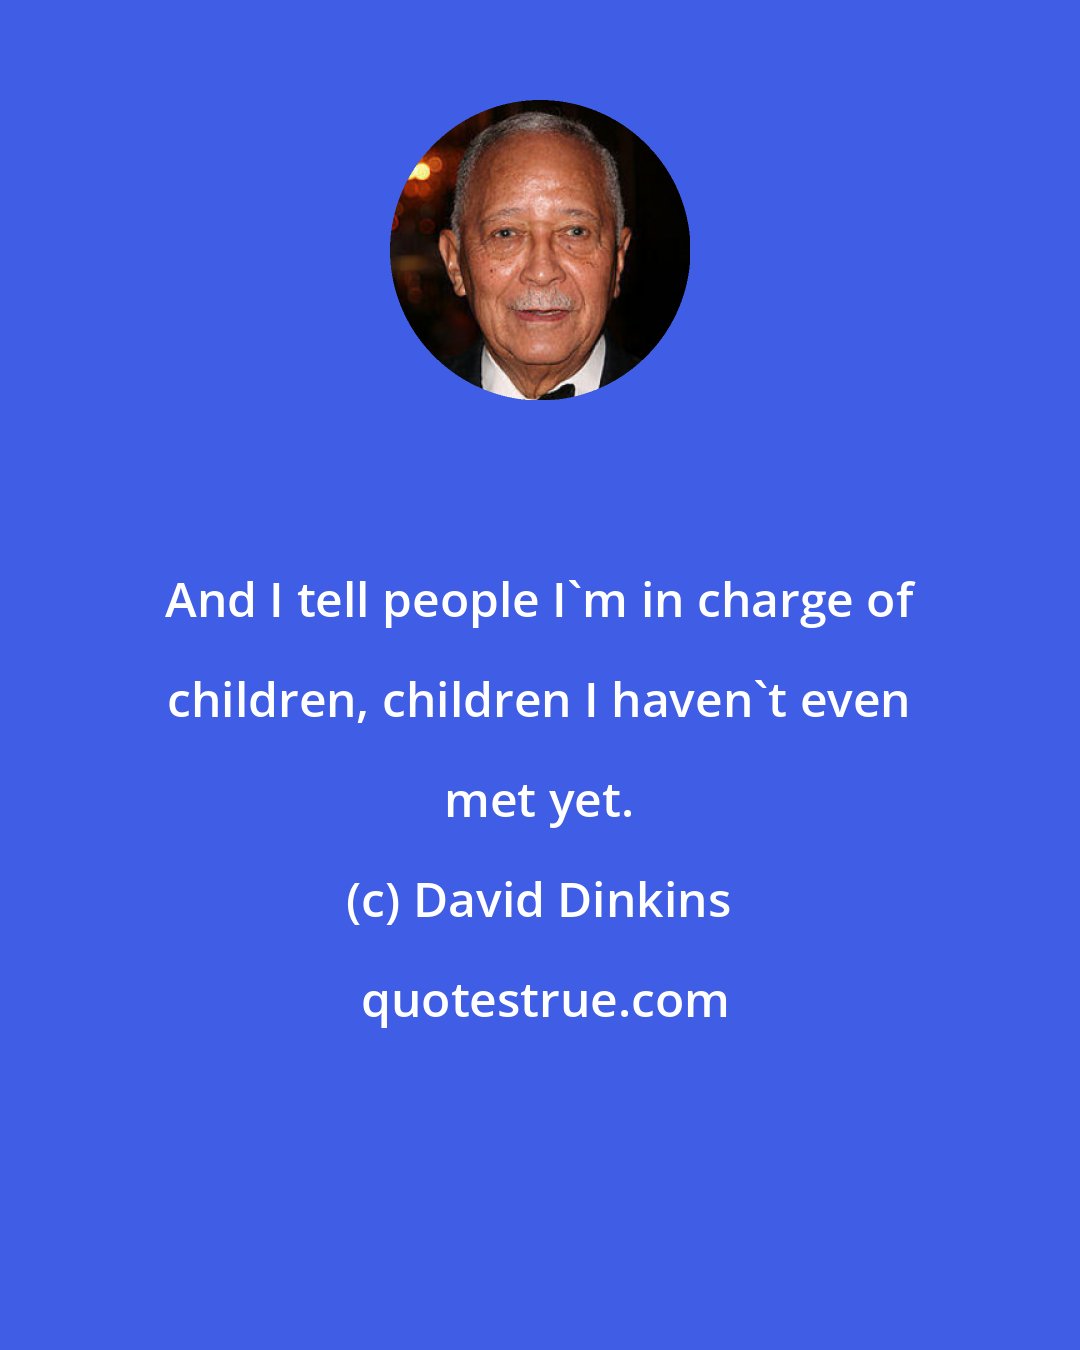 David Dinkins: And I tell people I'm in charge of children, children I haven't even met yet.